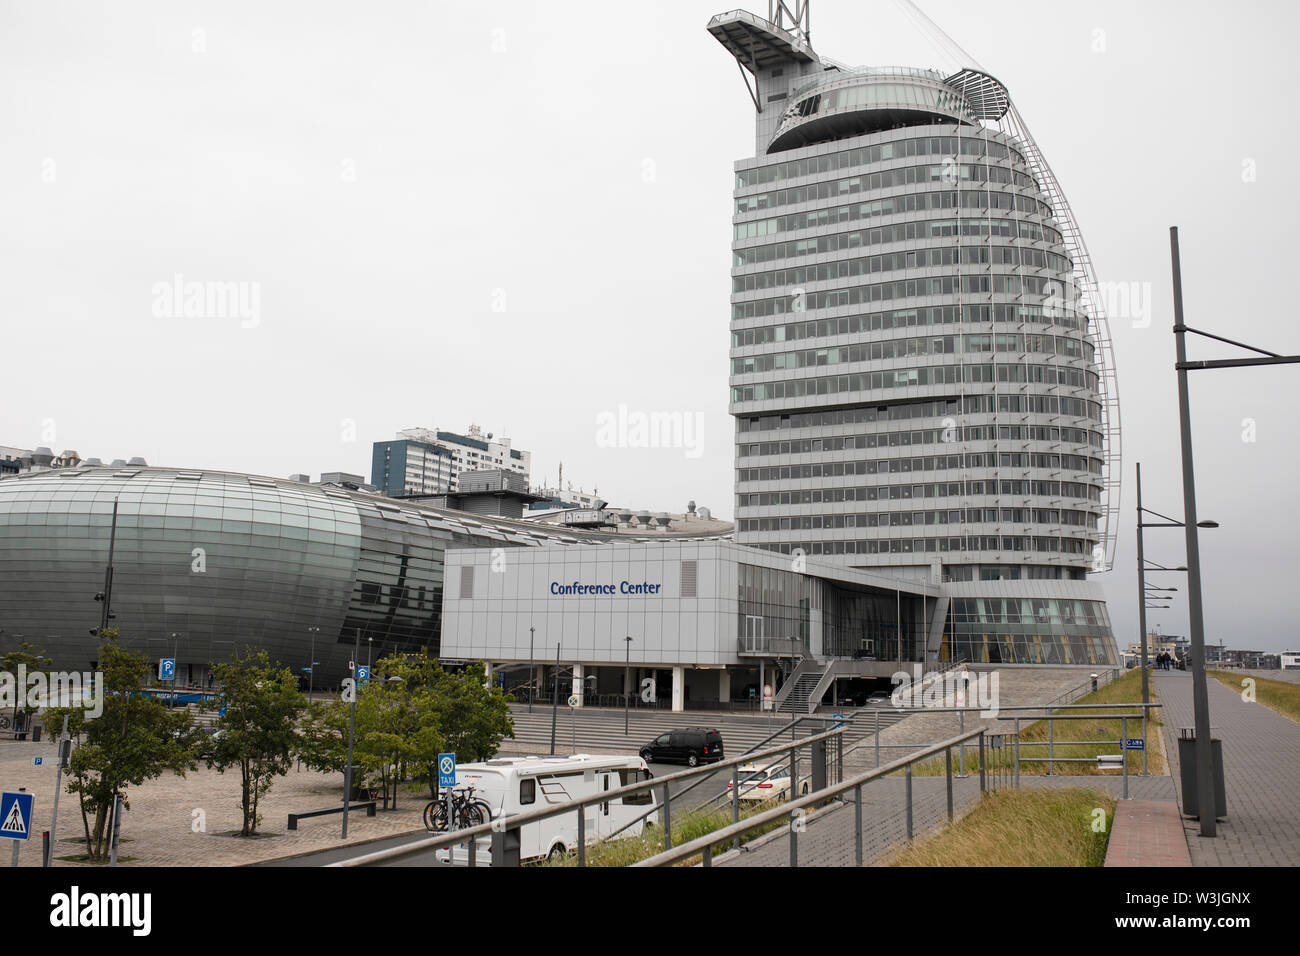 The conference center at Atlantic Hotel Sail City and the Klimahaus museum in Bremerhaven, Germany. Stock Photo